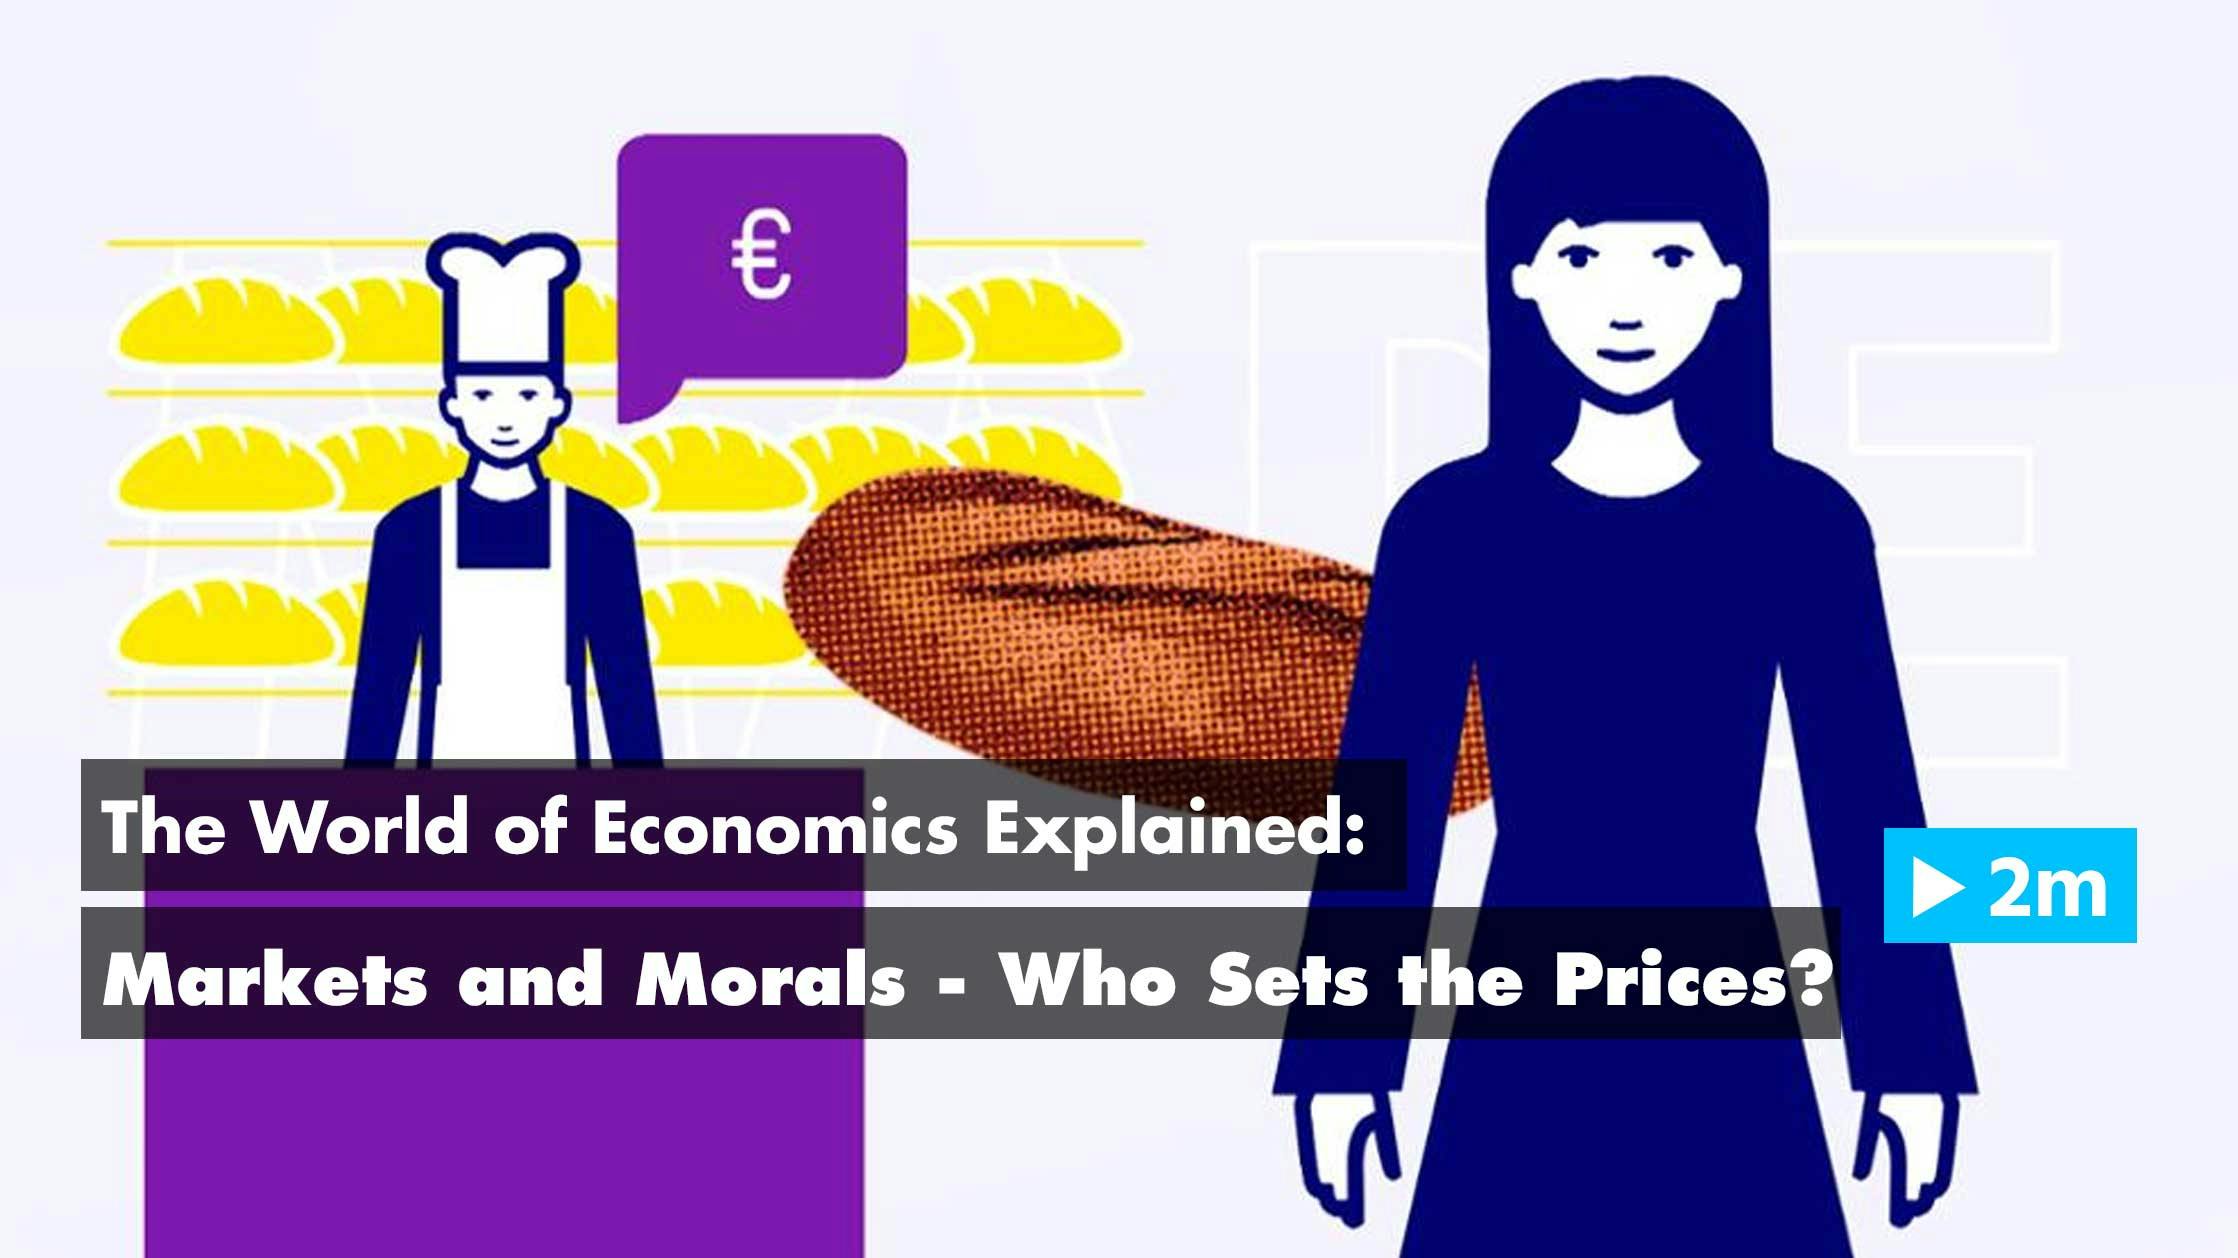 The world of Economics Explained: Markets and morals - who sets the prices